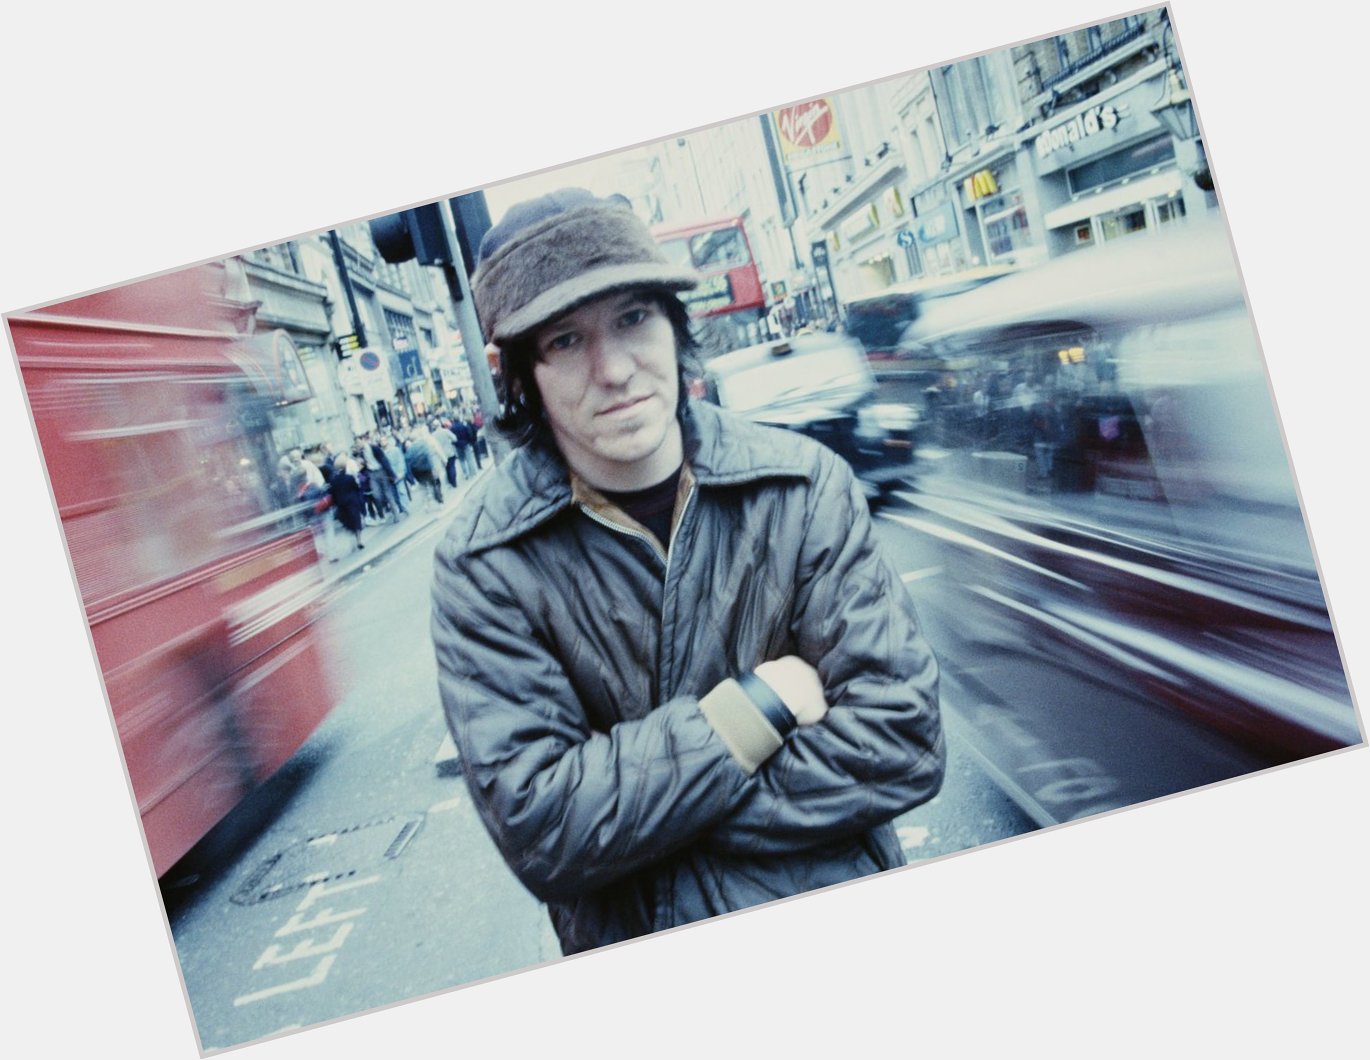 I thought I sensed a disturbance in the force today.
Happy Birthday Elliott Smith. 